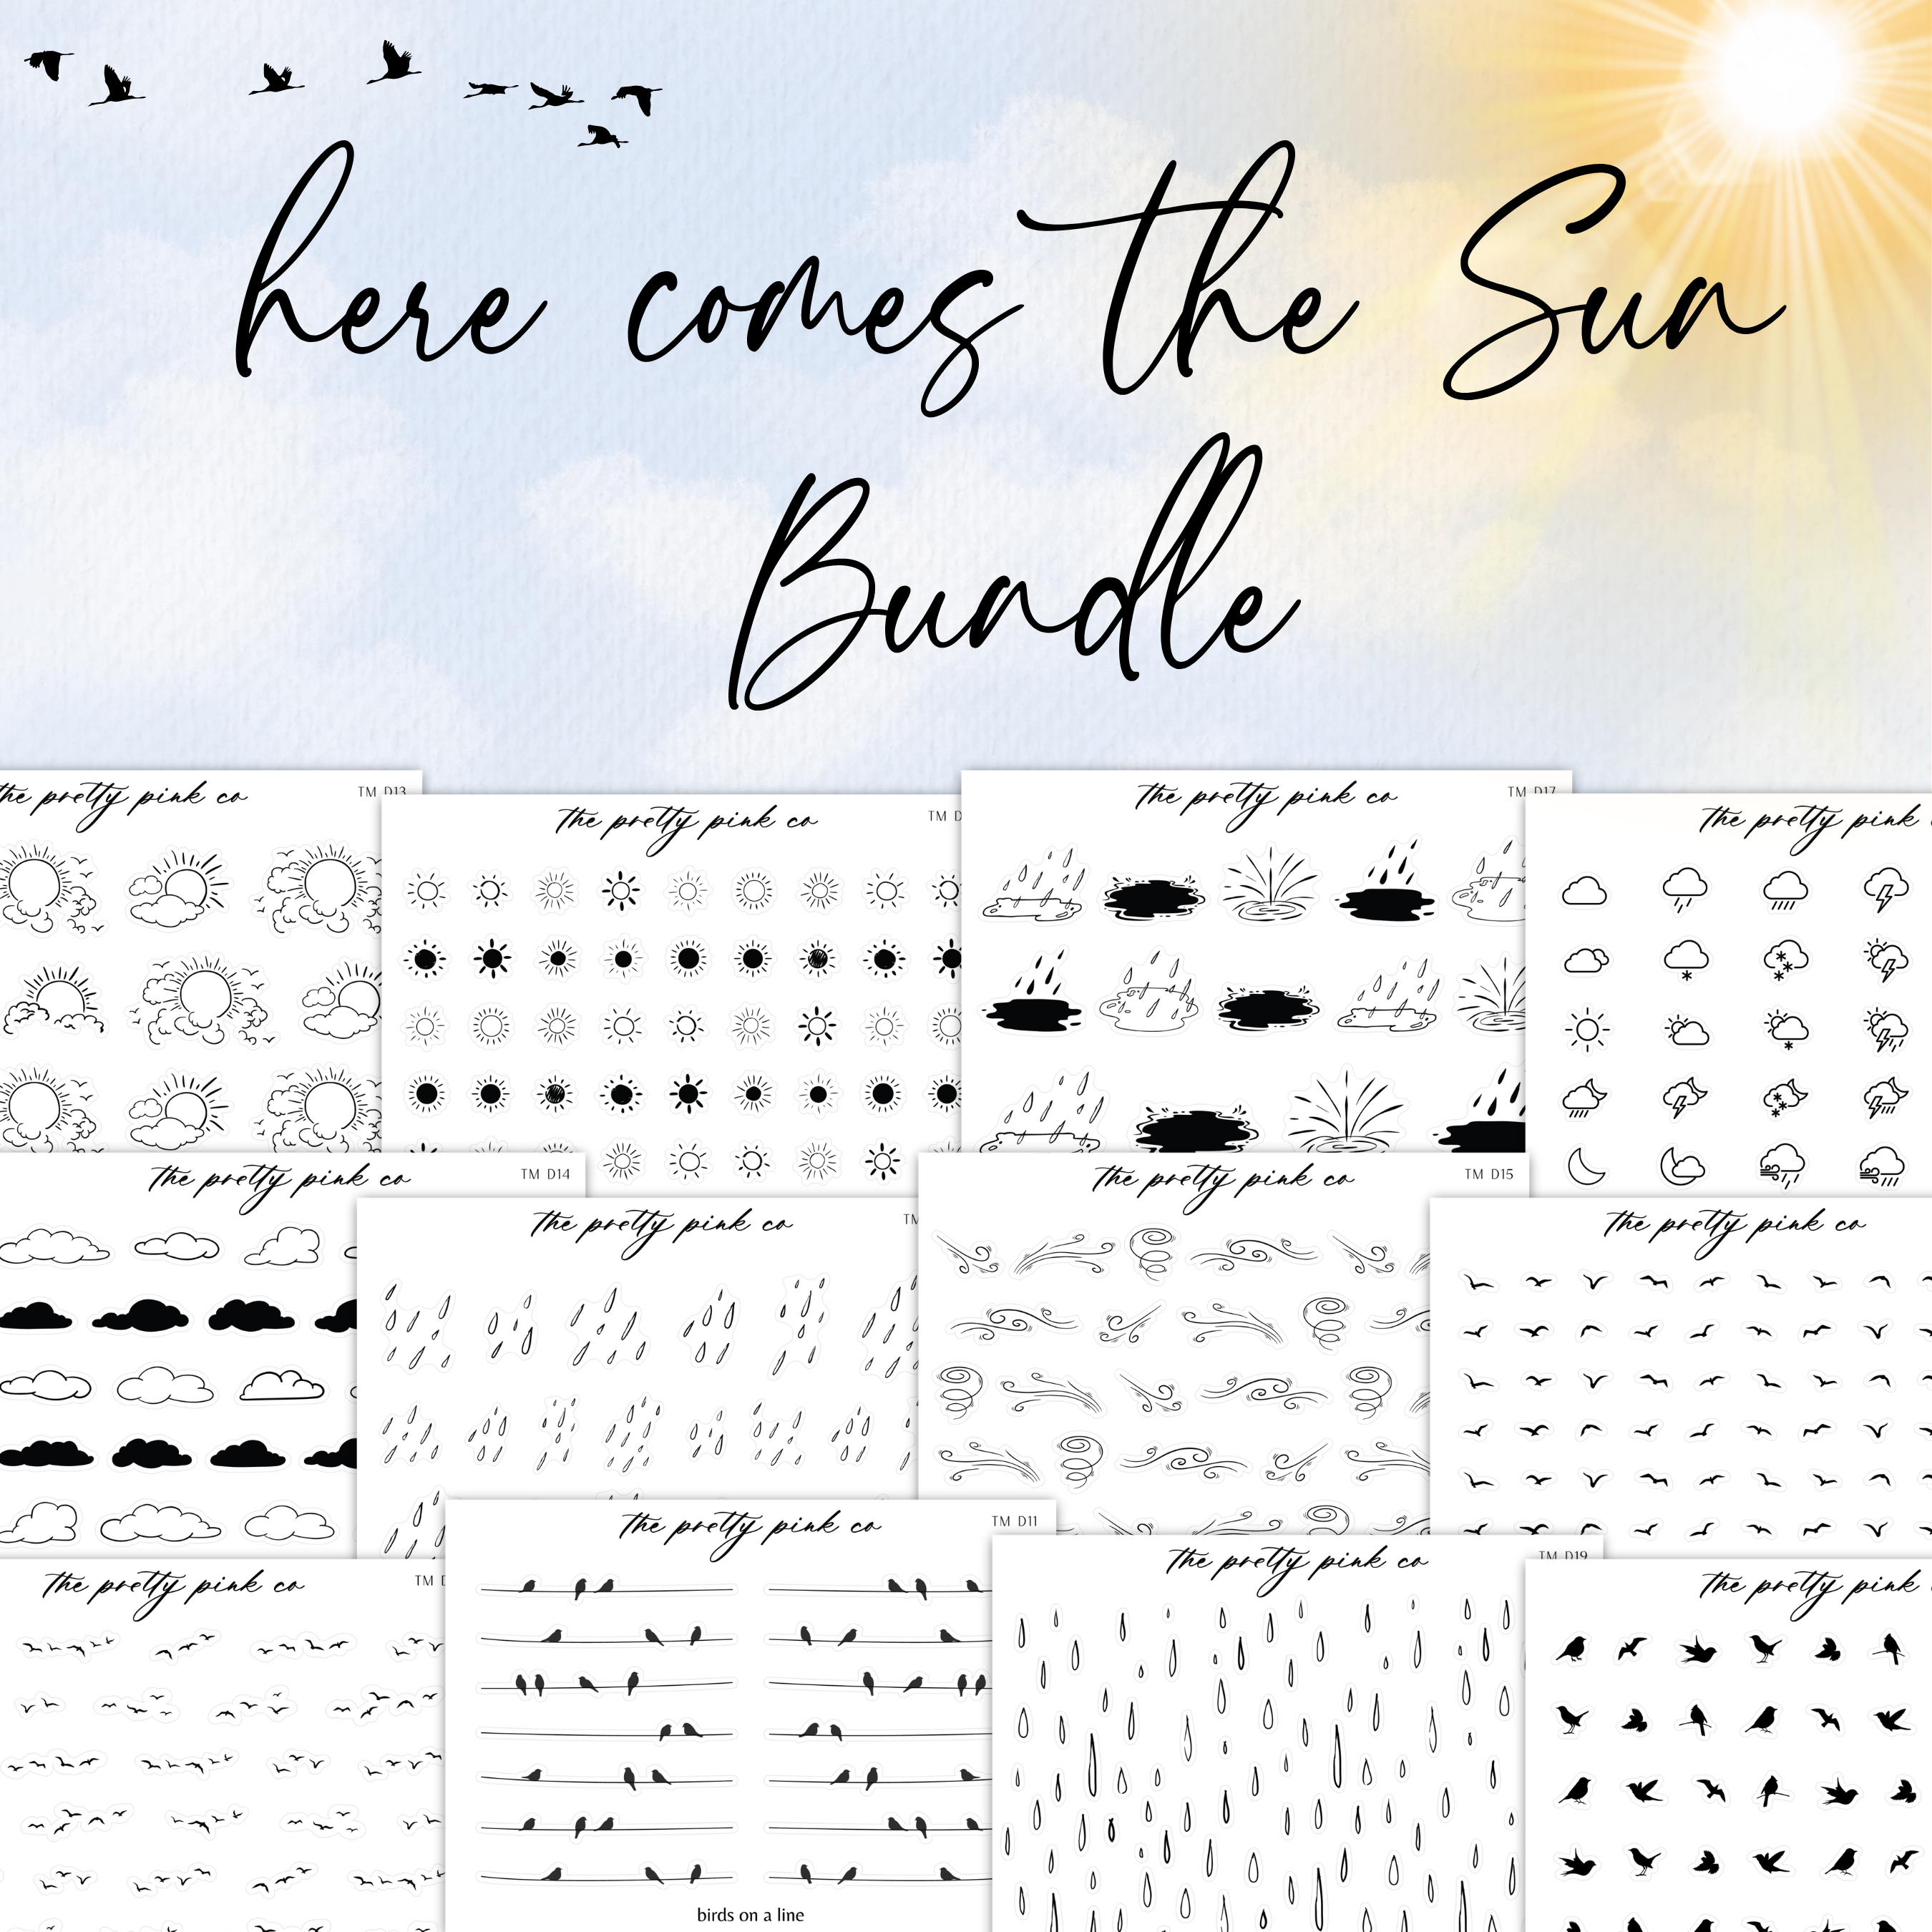 a large collection of handwritten font and symbols